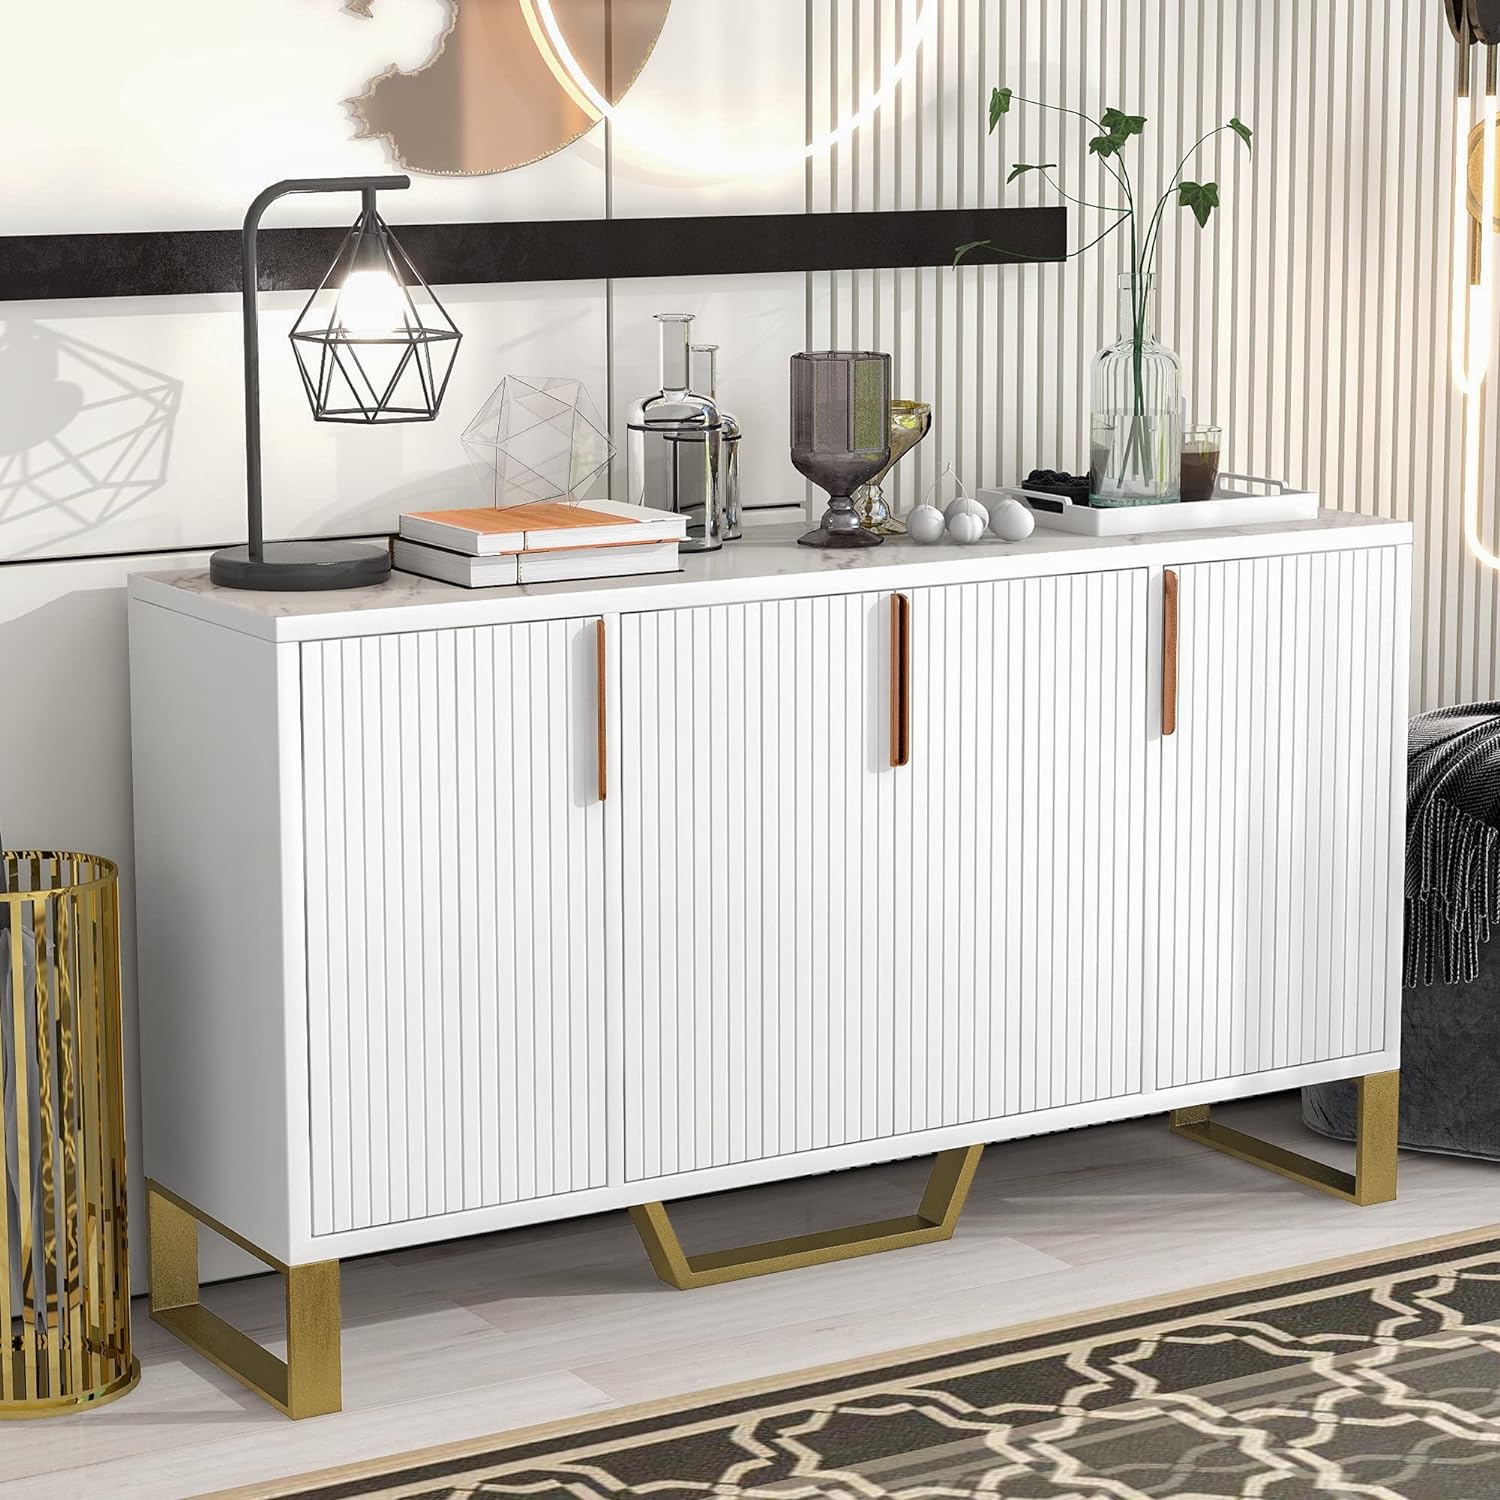 WILLIAMSPACE 60 White Modern Sideboard Buffet Cabinet, Mid-Century Wood Cabinet with 4 Doors & Gold Metal Legs, Adjustable Shelves for Living Room, Dining Room (White)